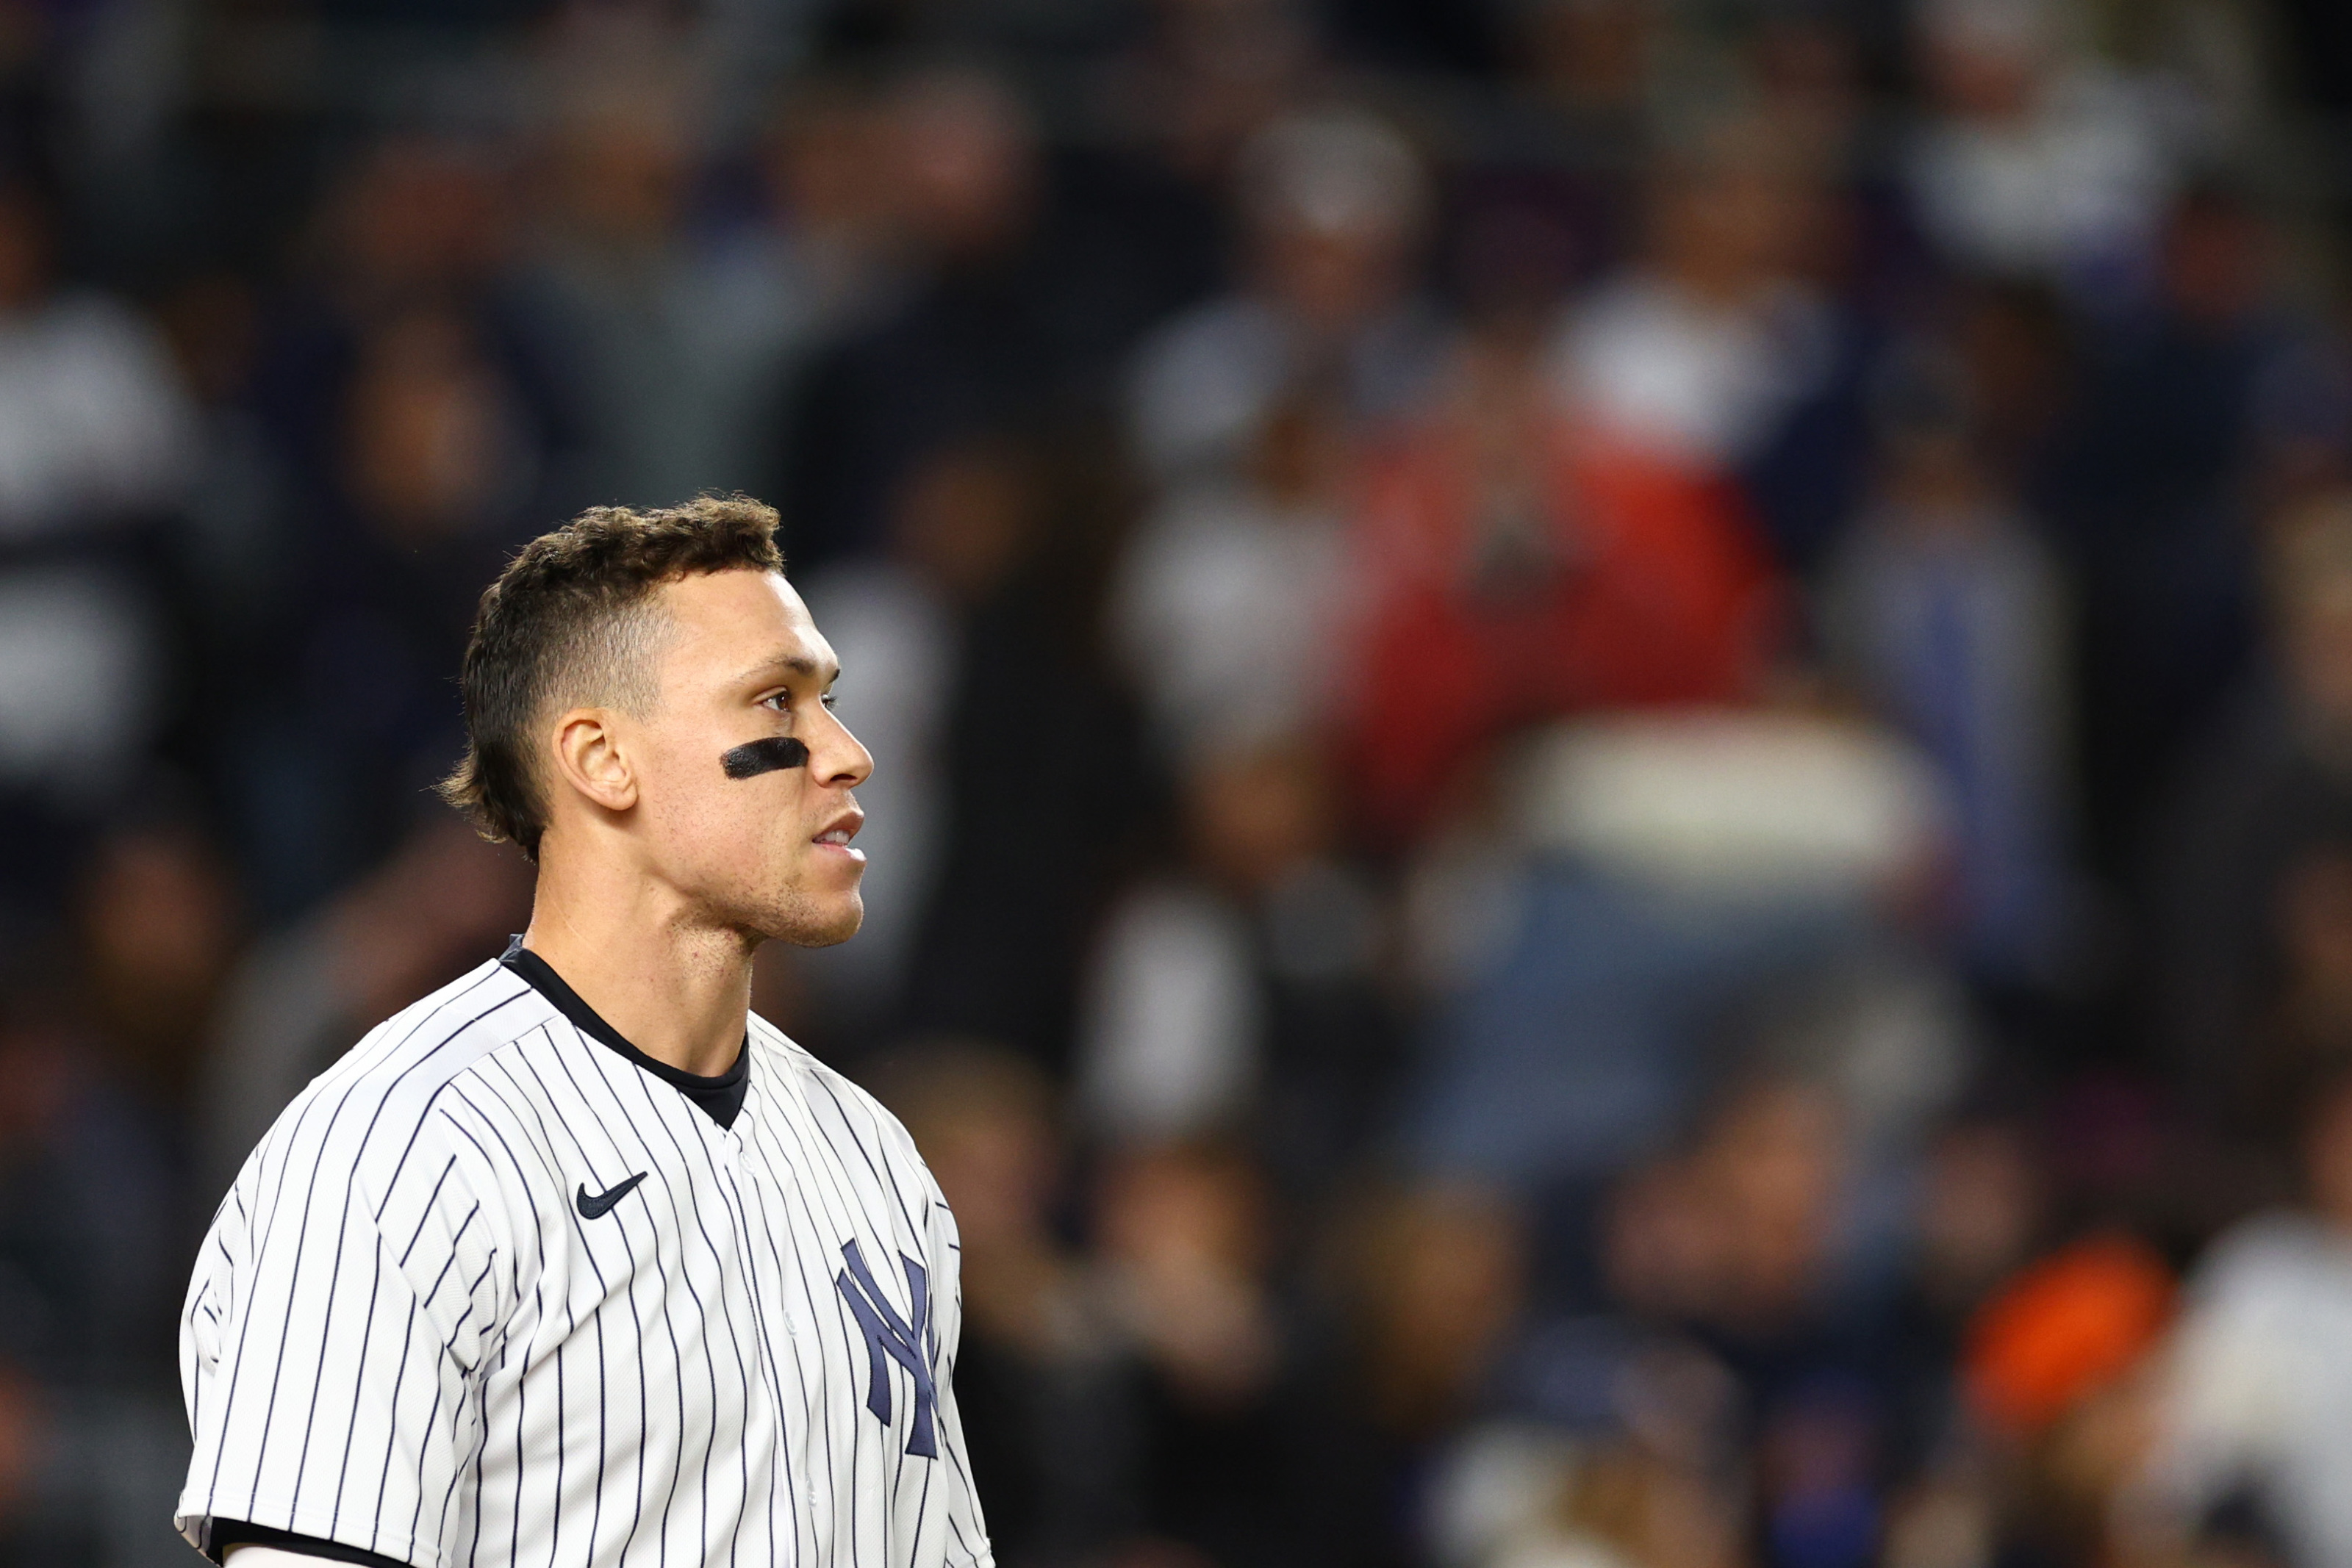 Yankees biggest threat to sign Aaron Judge appears hellbent on pursuit